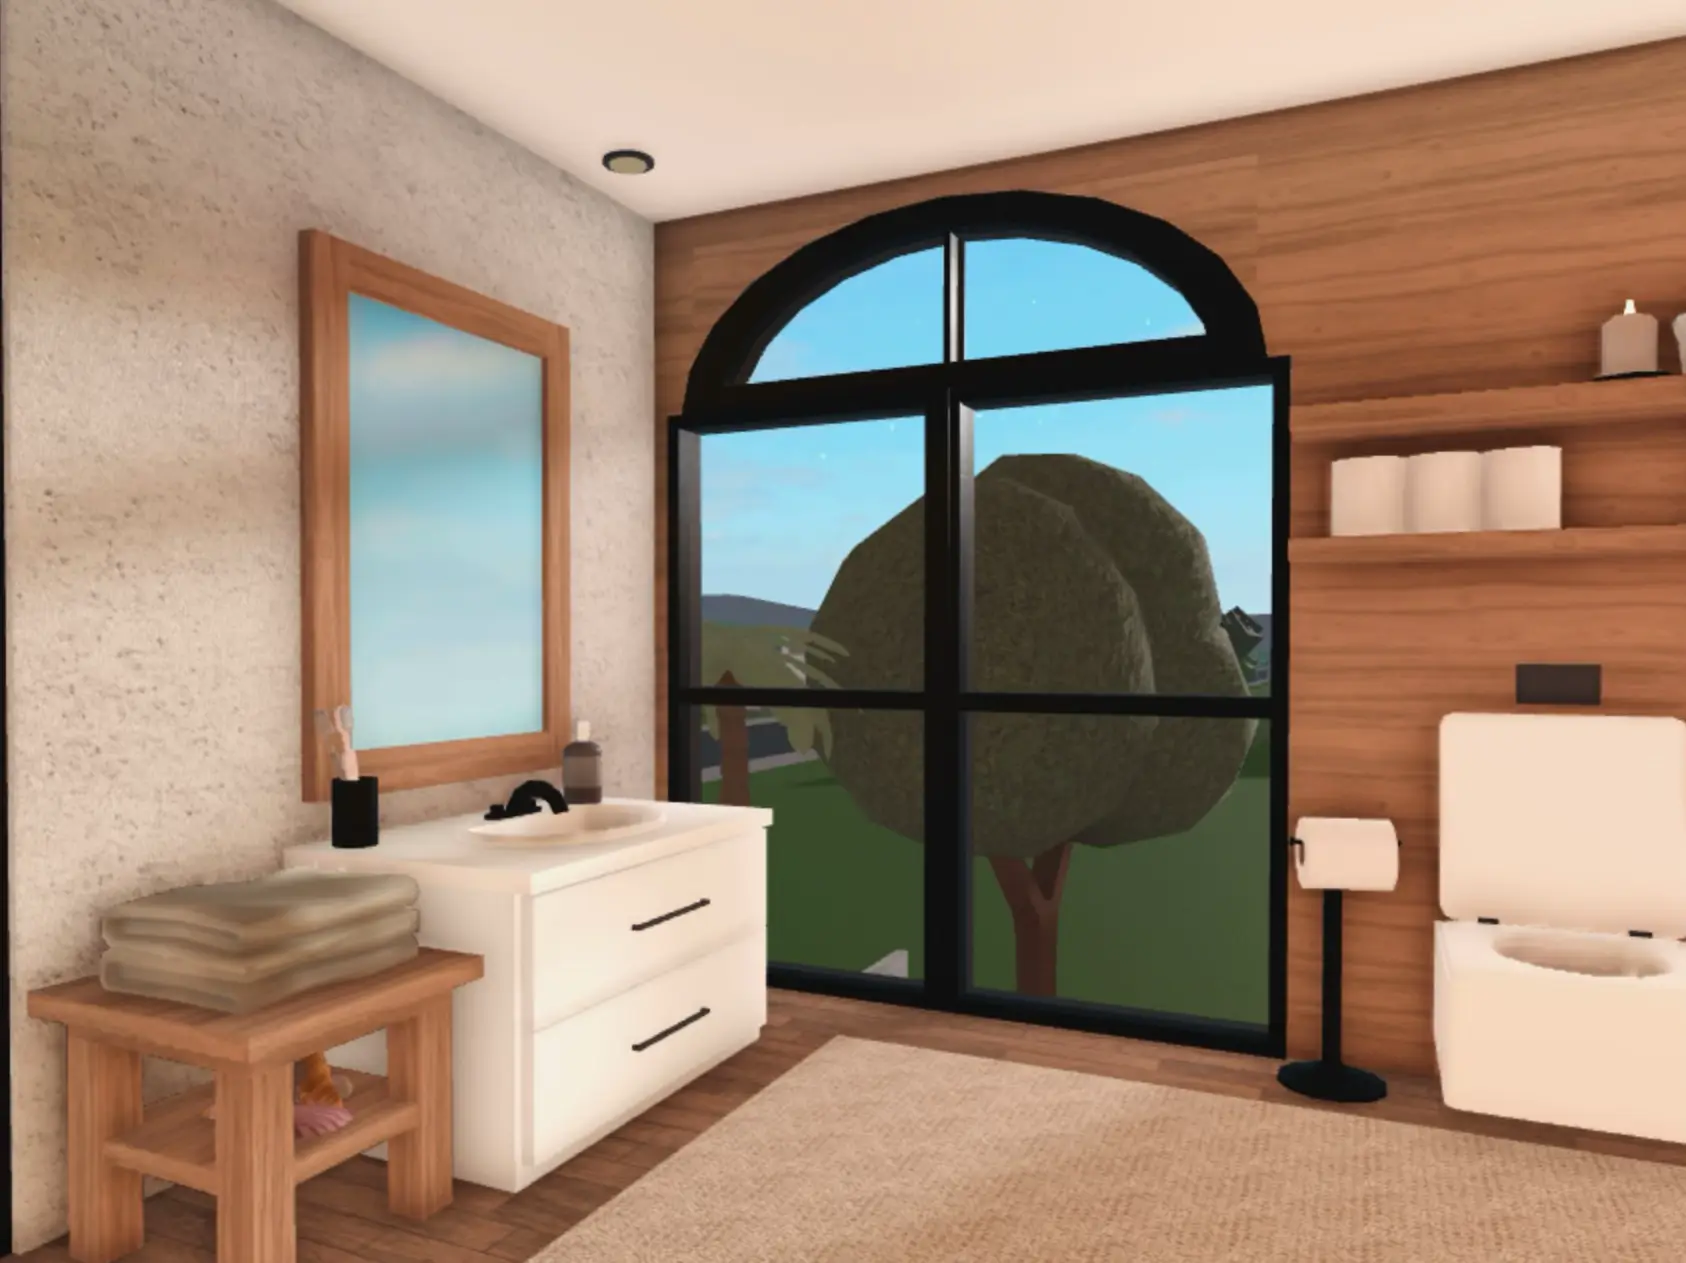 Bloxburg house inspo 🦋, Gallery posted by bloxytuts 🦋